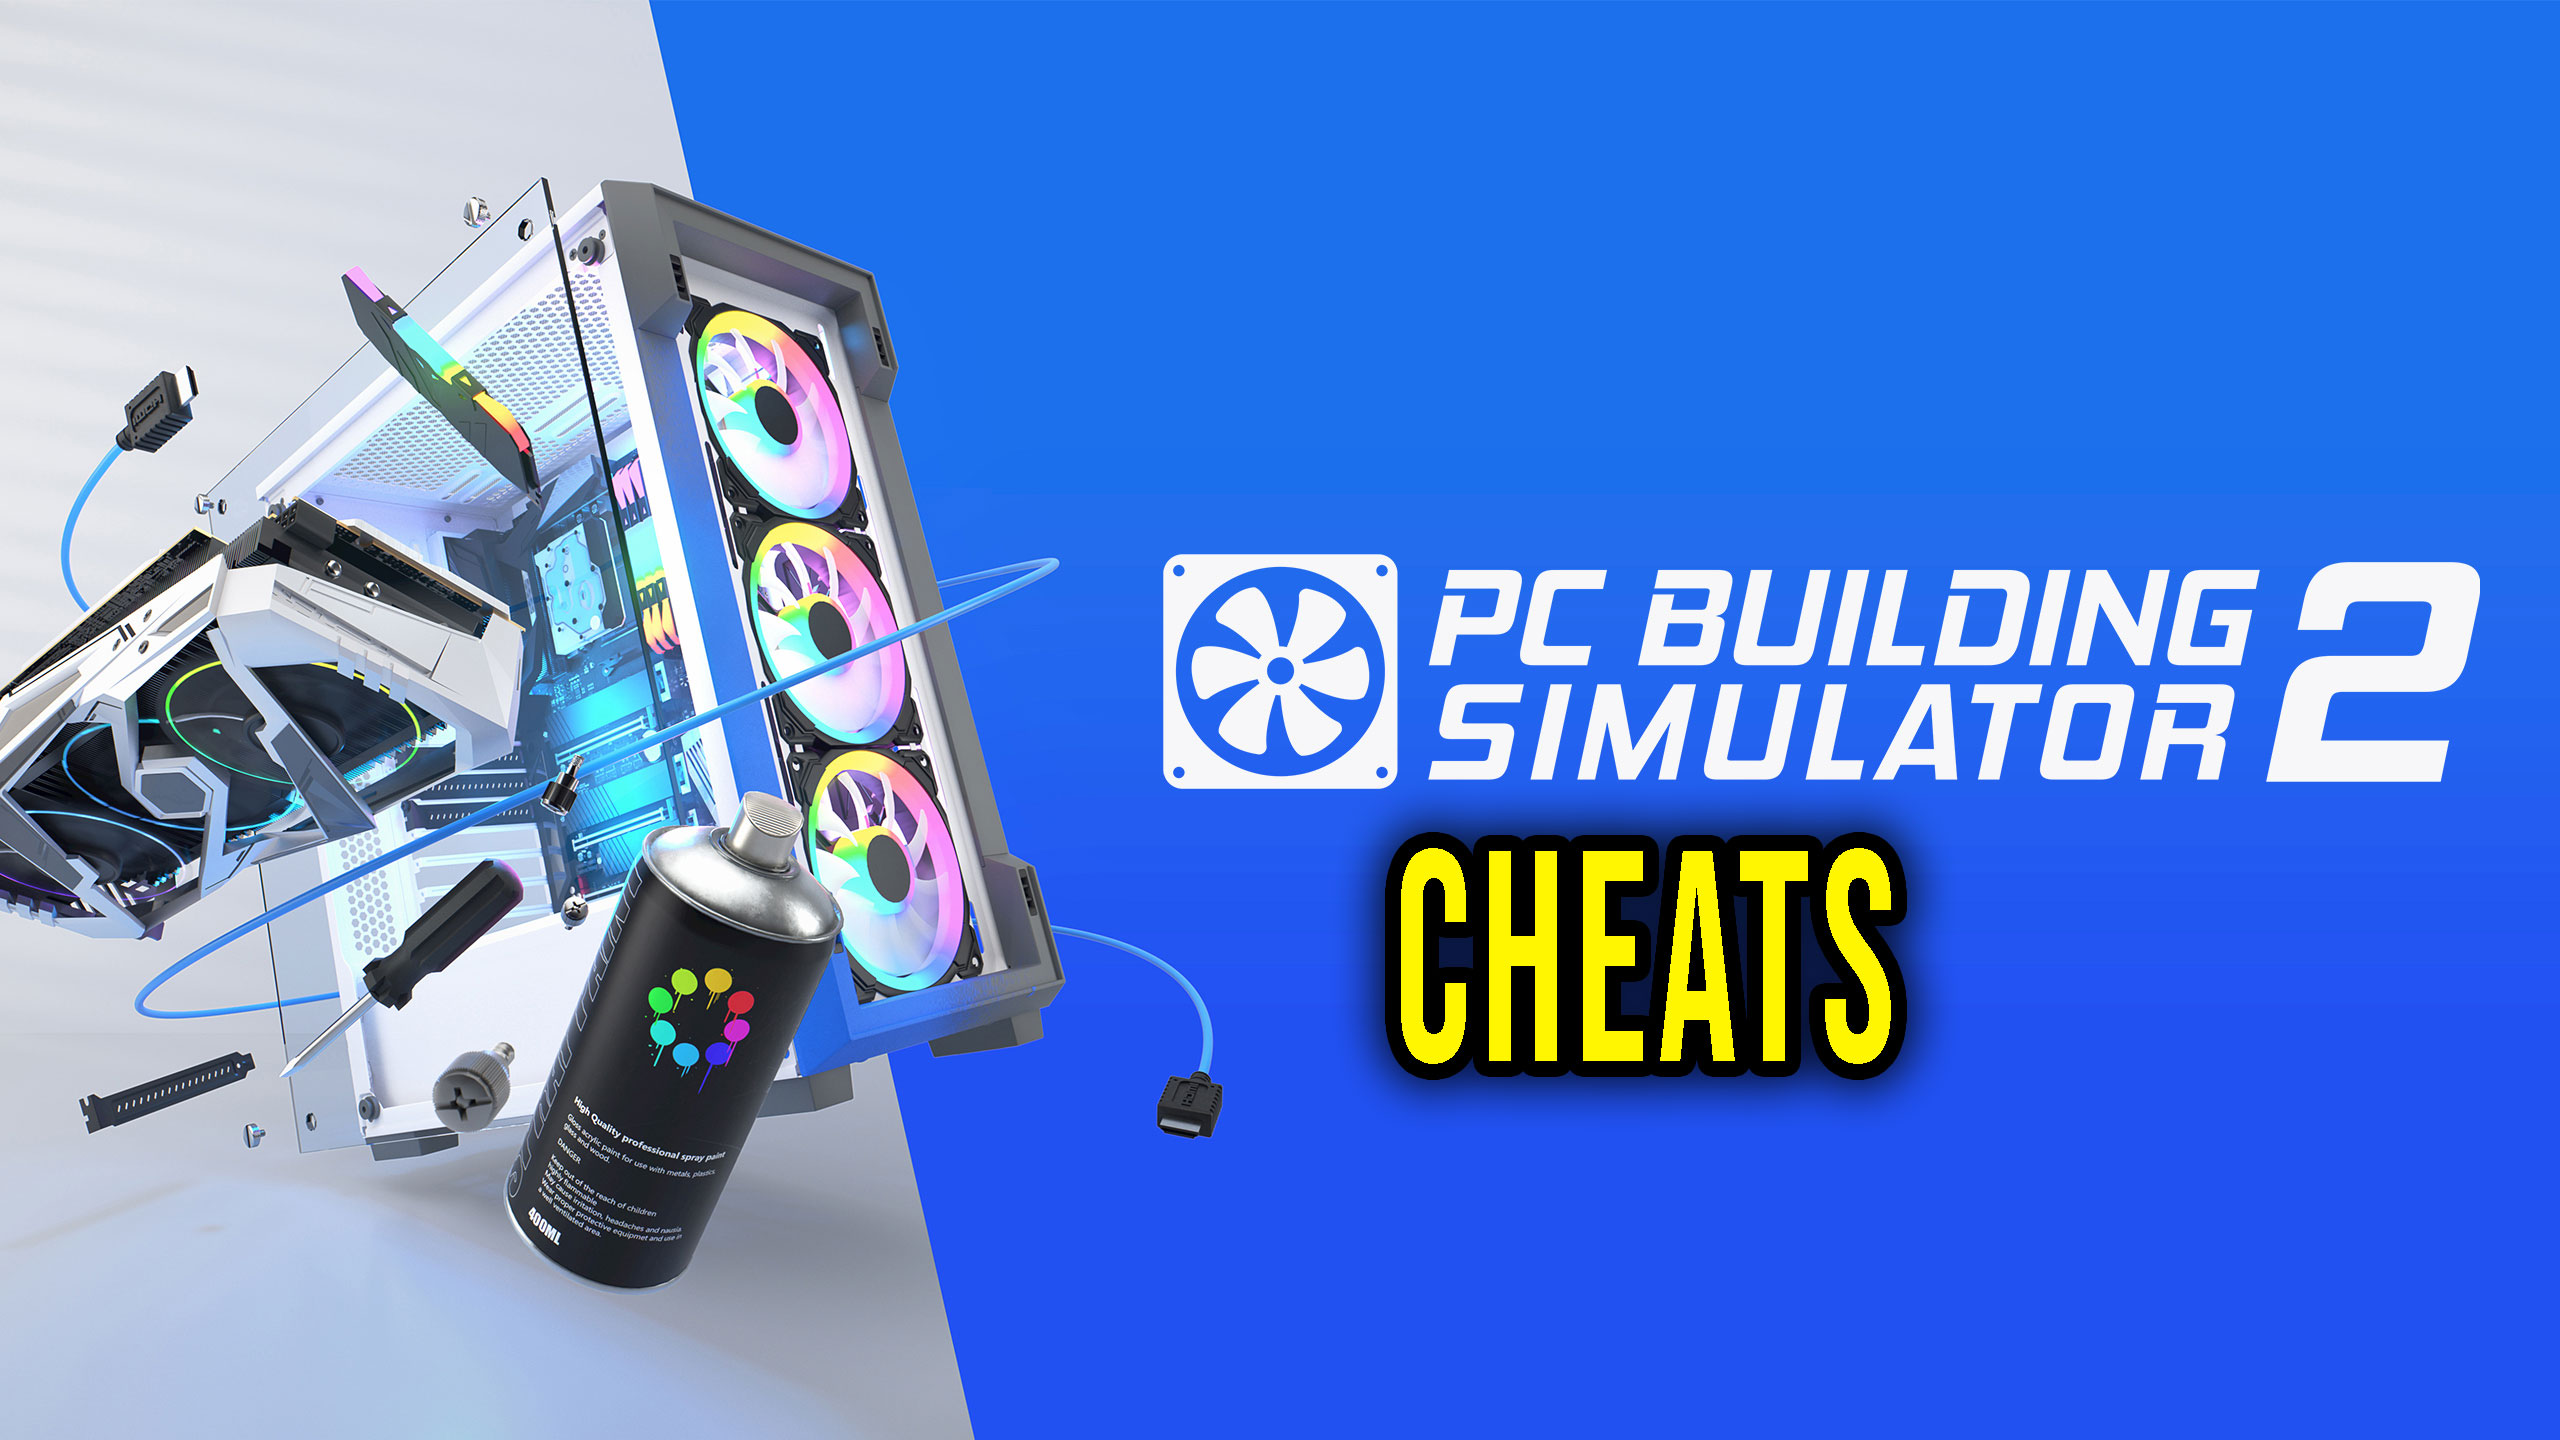 PC Building Simulator 2 Cheats Trainers Codes Games Manuals